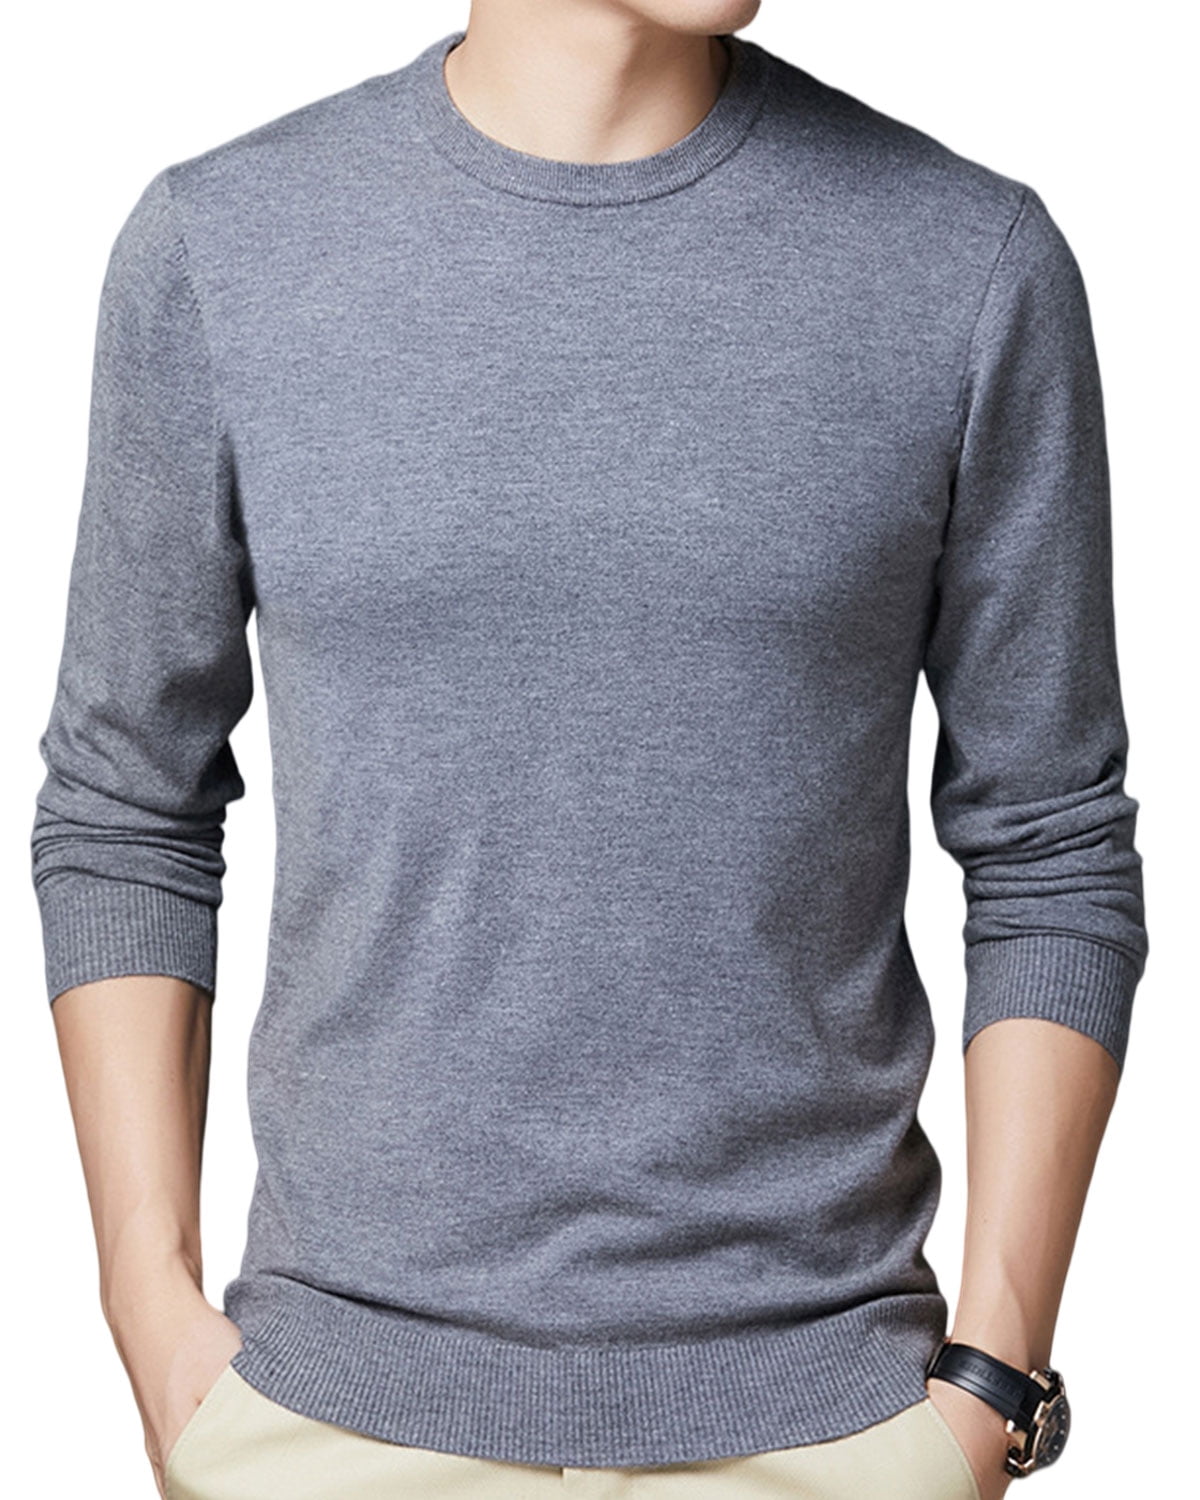 Alion Mens Turtleneck Pullover Sweater Casual Knit Slim Fit Sweater